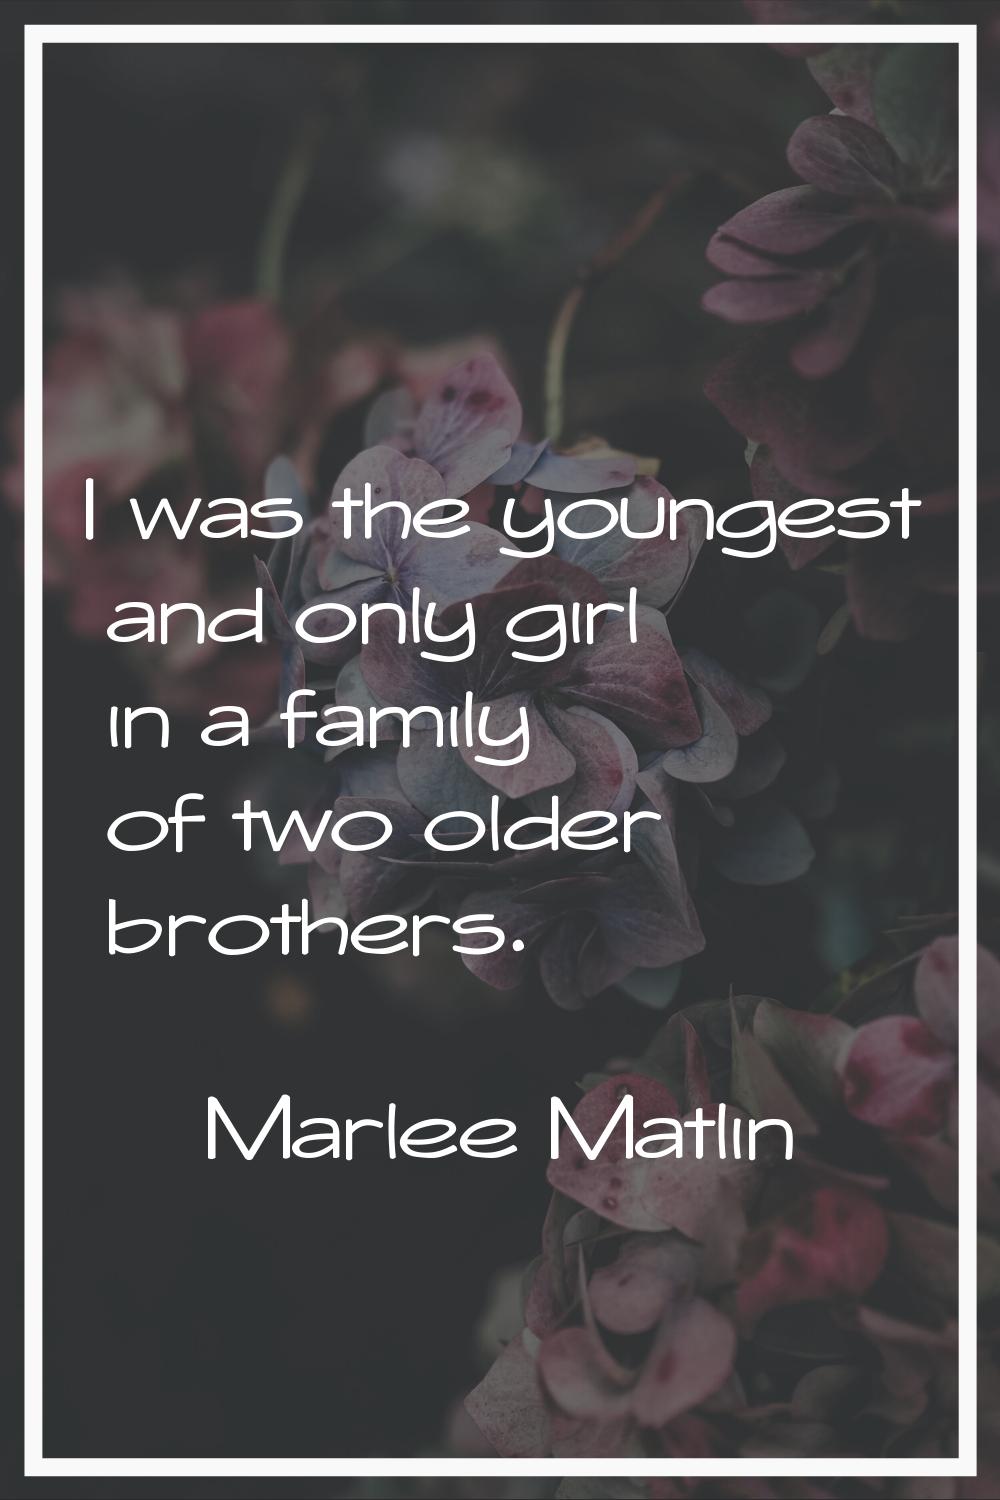 I was the youngest and only girl in a family of two older brothers.